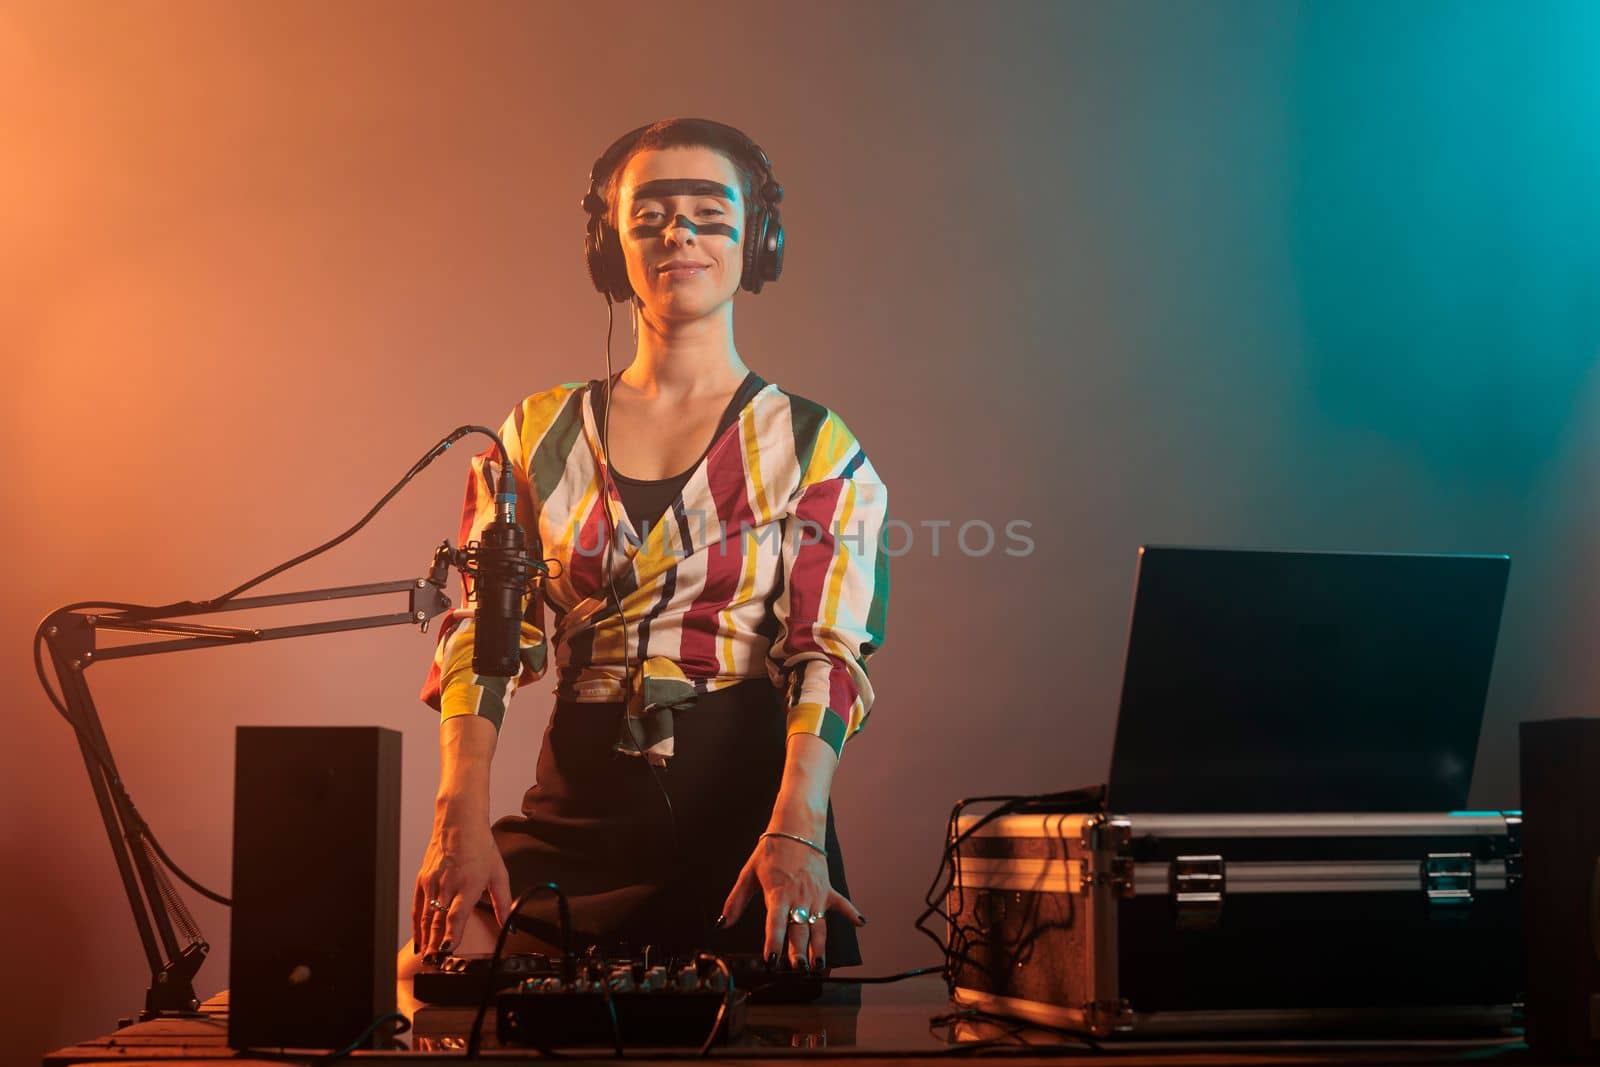 Happy female performer working as dj with turntables, mixing techno music with bass and audio equipment. DJ woman playing songs at mixer, standing over colorful background with smoke.